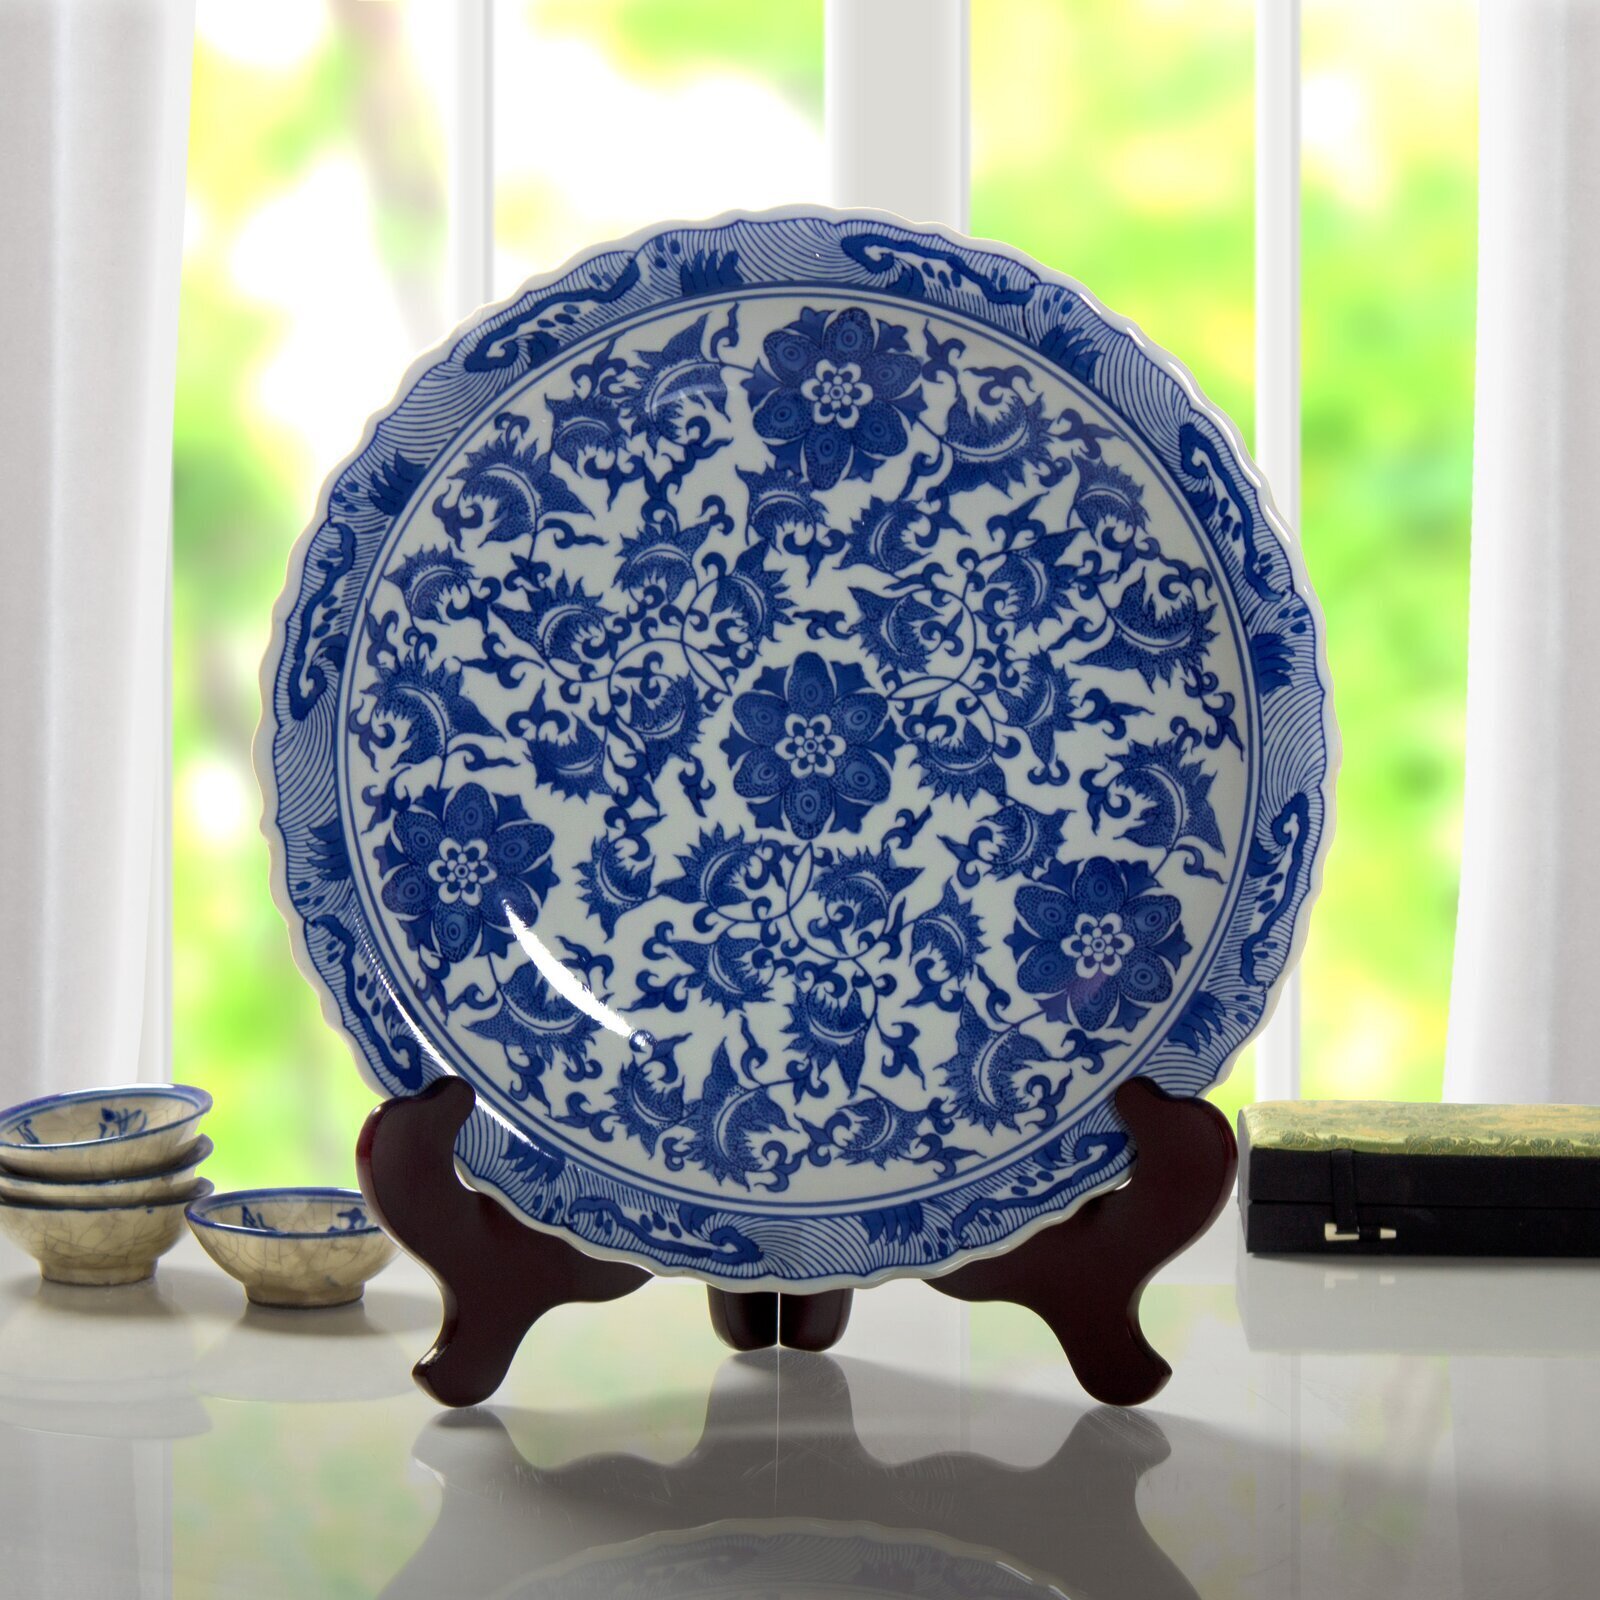 Classic Blue and White Floral Motif Ceramic Wall Plates